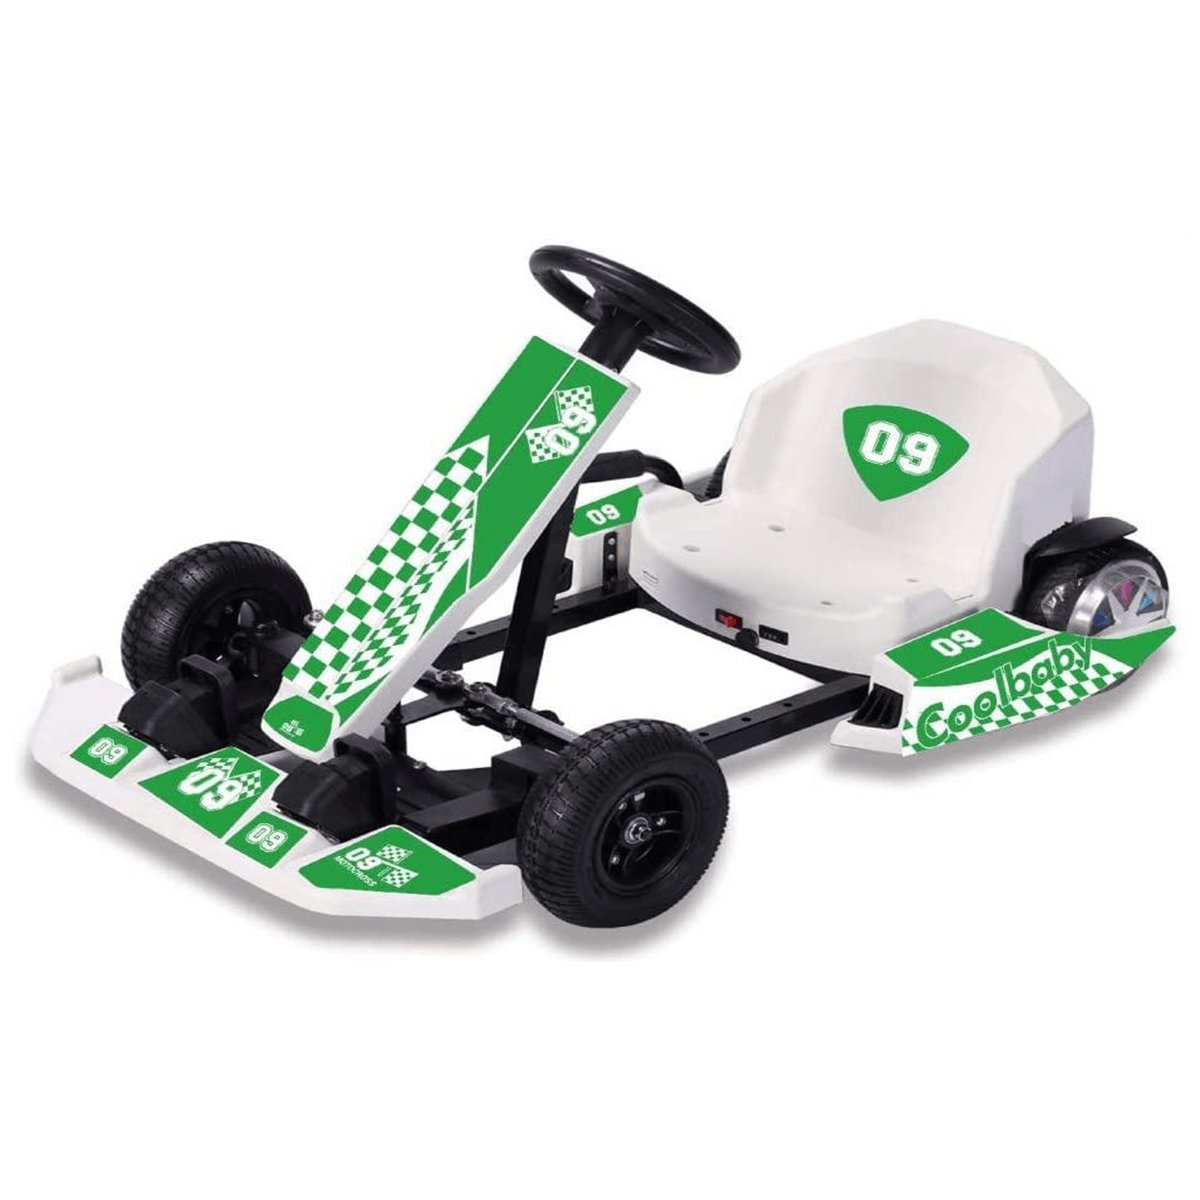 Crazy Drift Electric Scooter Go Cart Kating Car